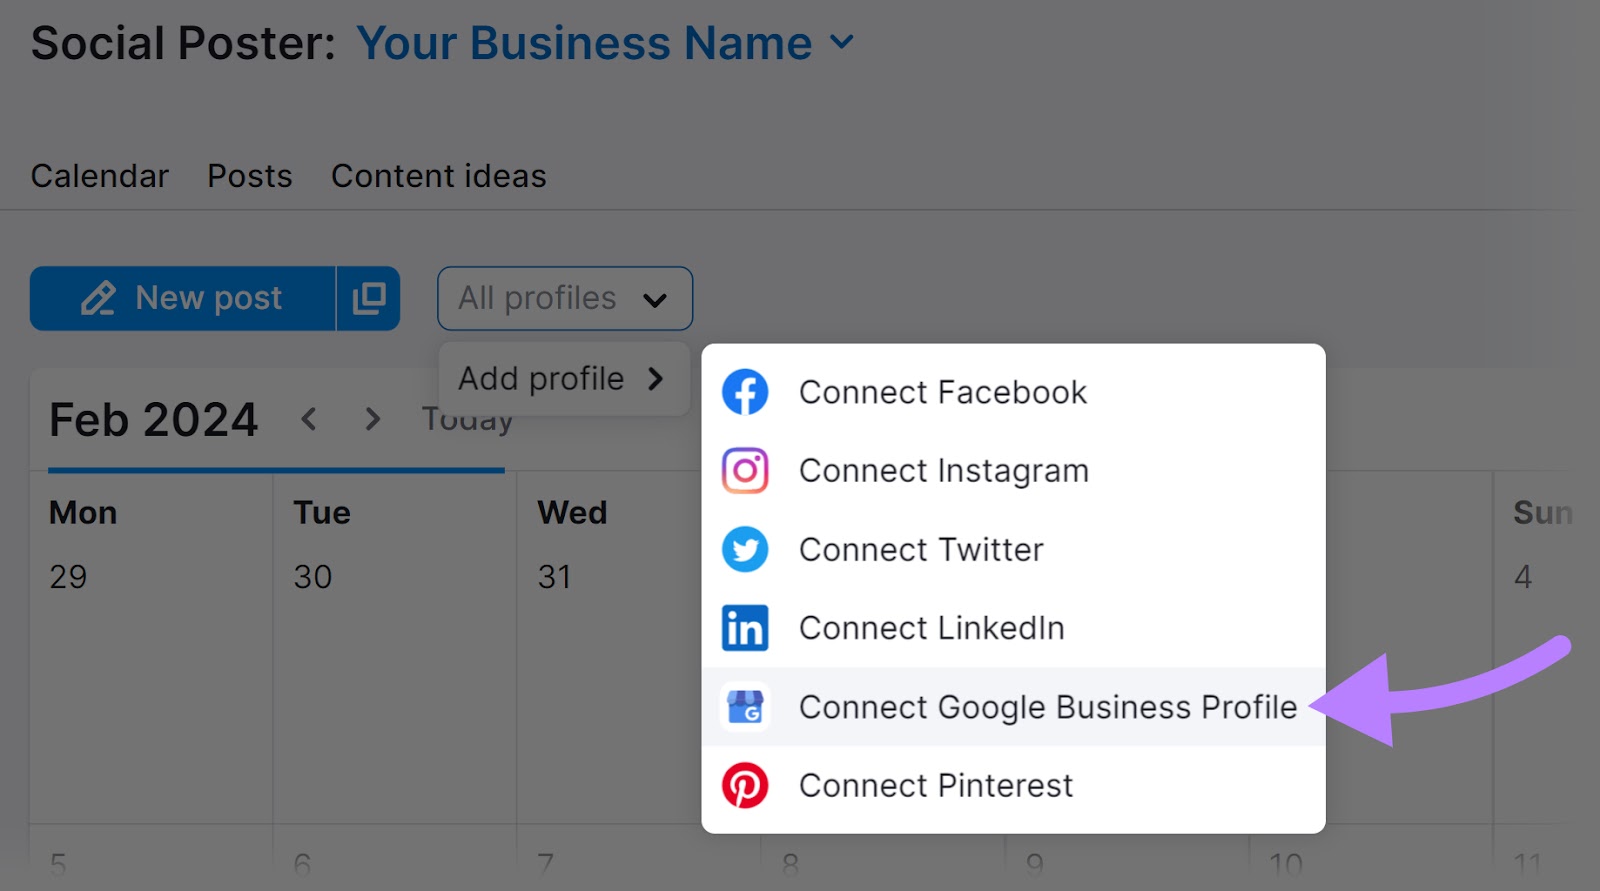 “Connect Google Business Profile” option selected in Social Poster